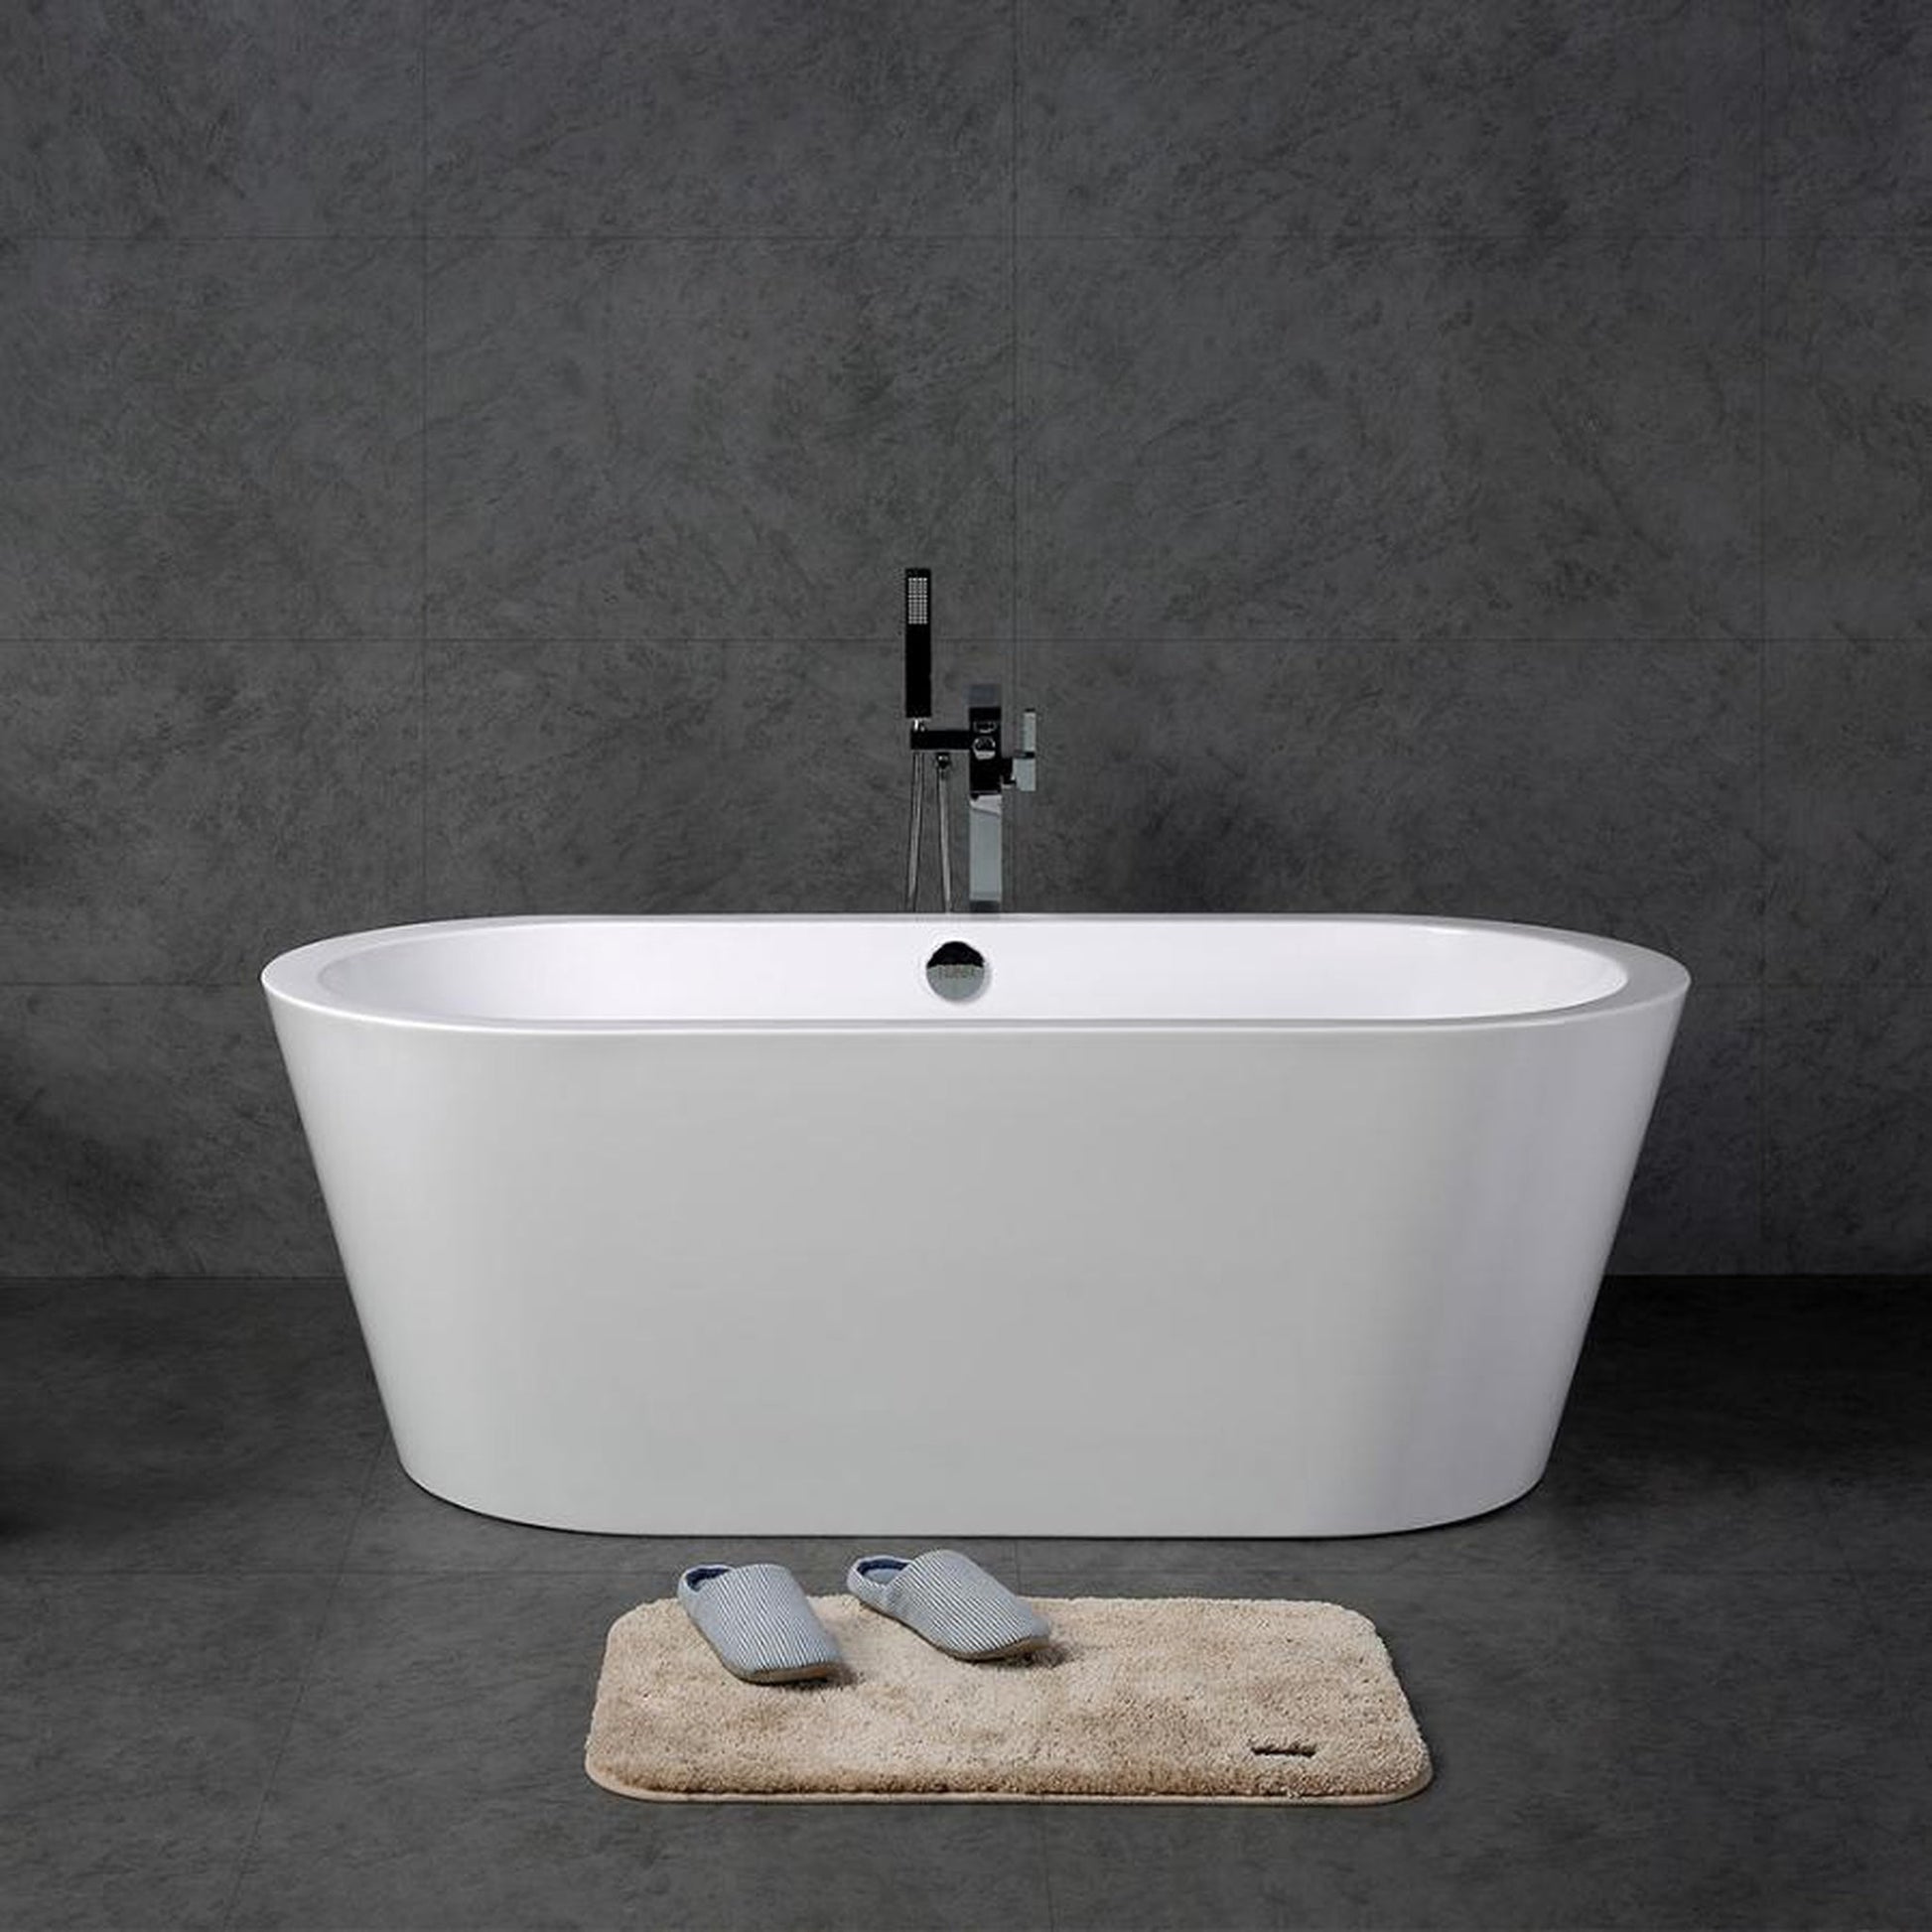 TONA Queen 67" Glossy White Acrylic Freestanding Oval Bathtub With Chrome-Plated Drain Cover & Overflow Cover